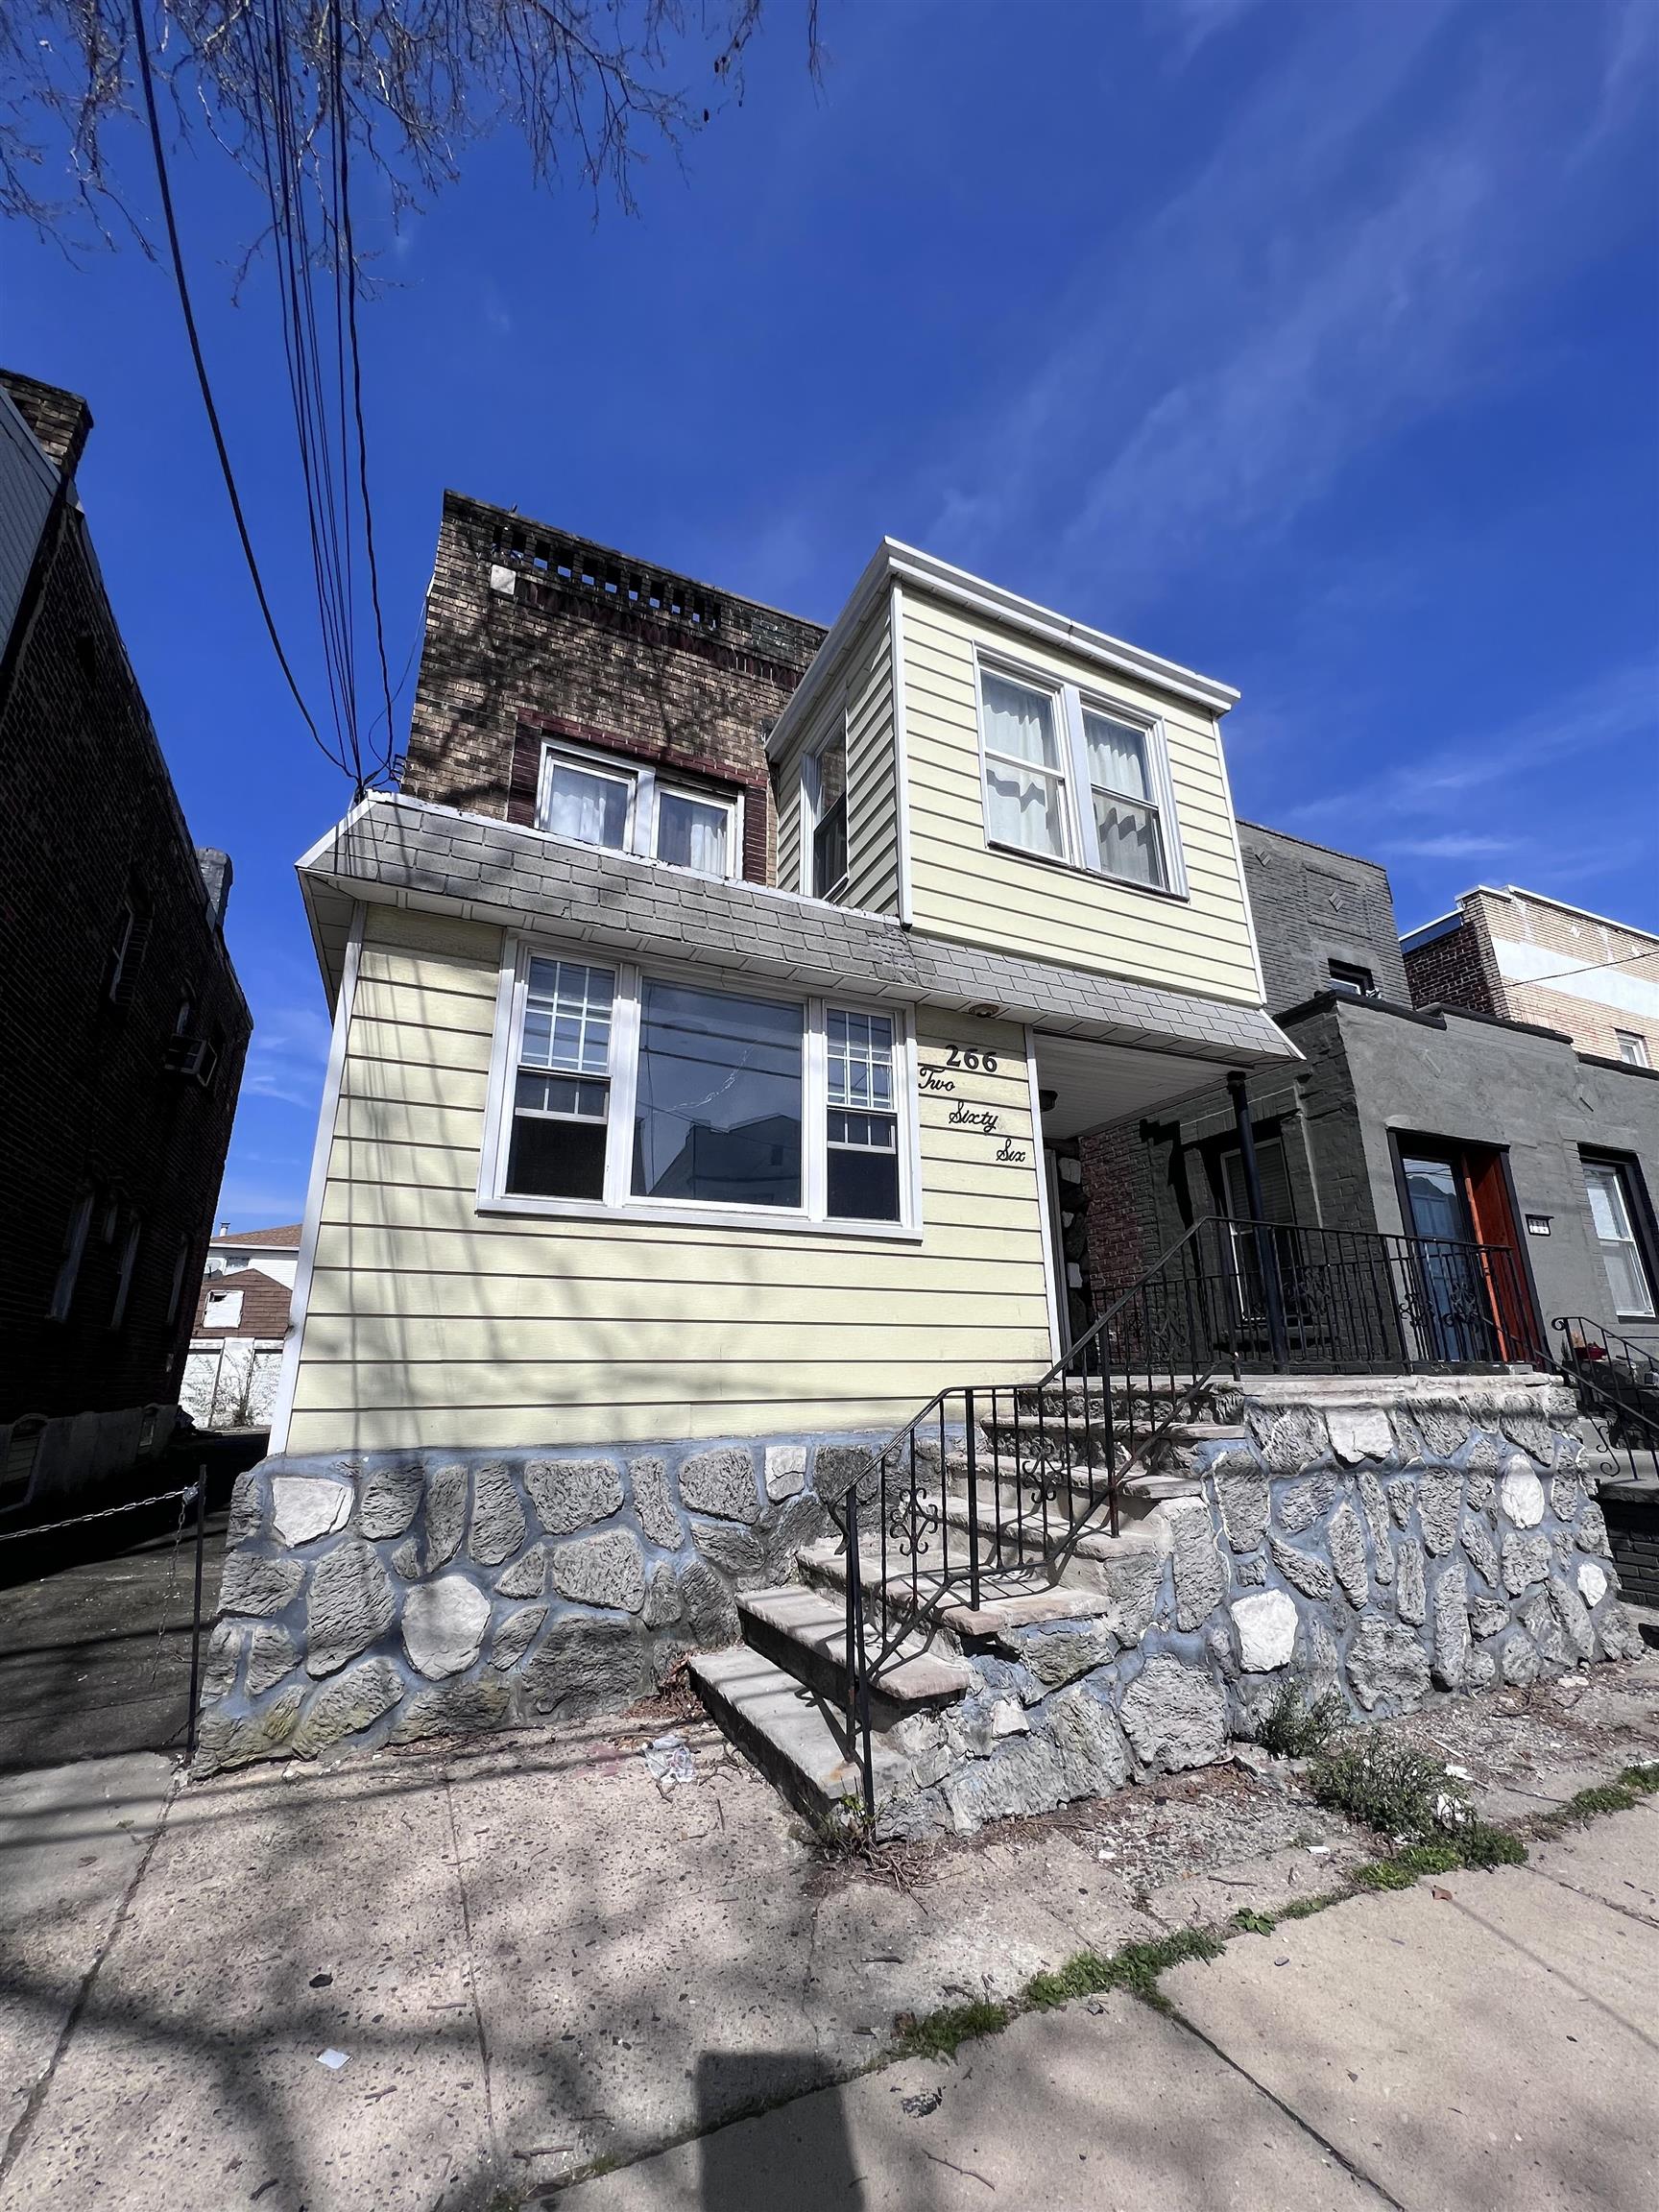 # 240006559 - For Rent in JERSEY CITY - Greenville NJ